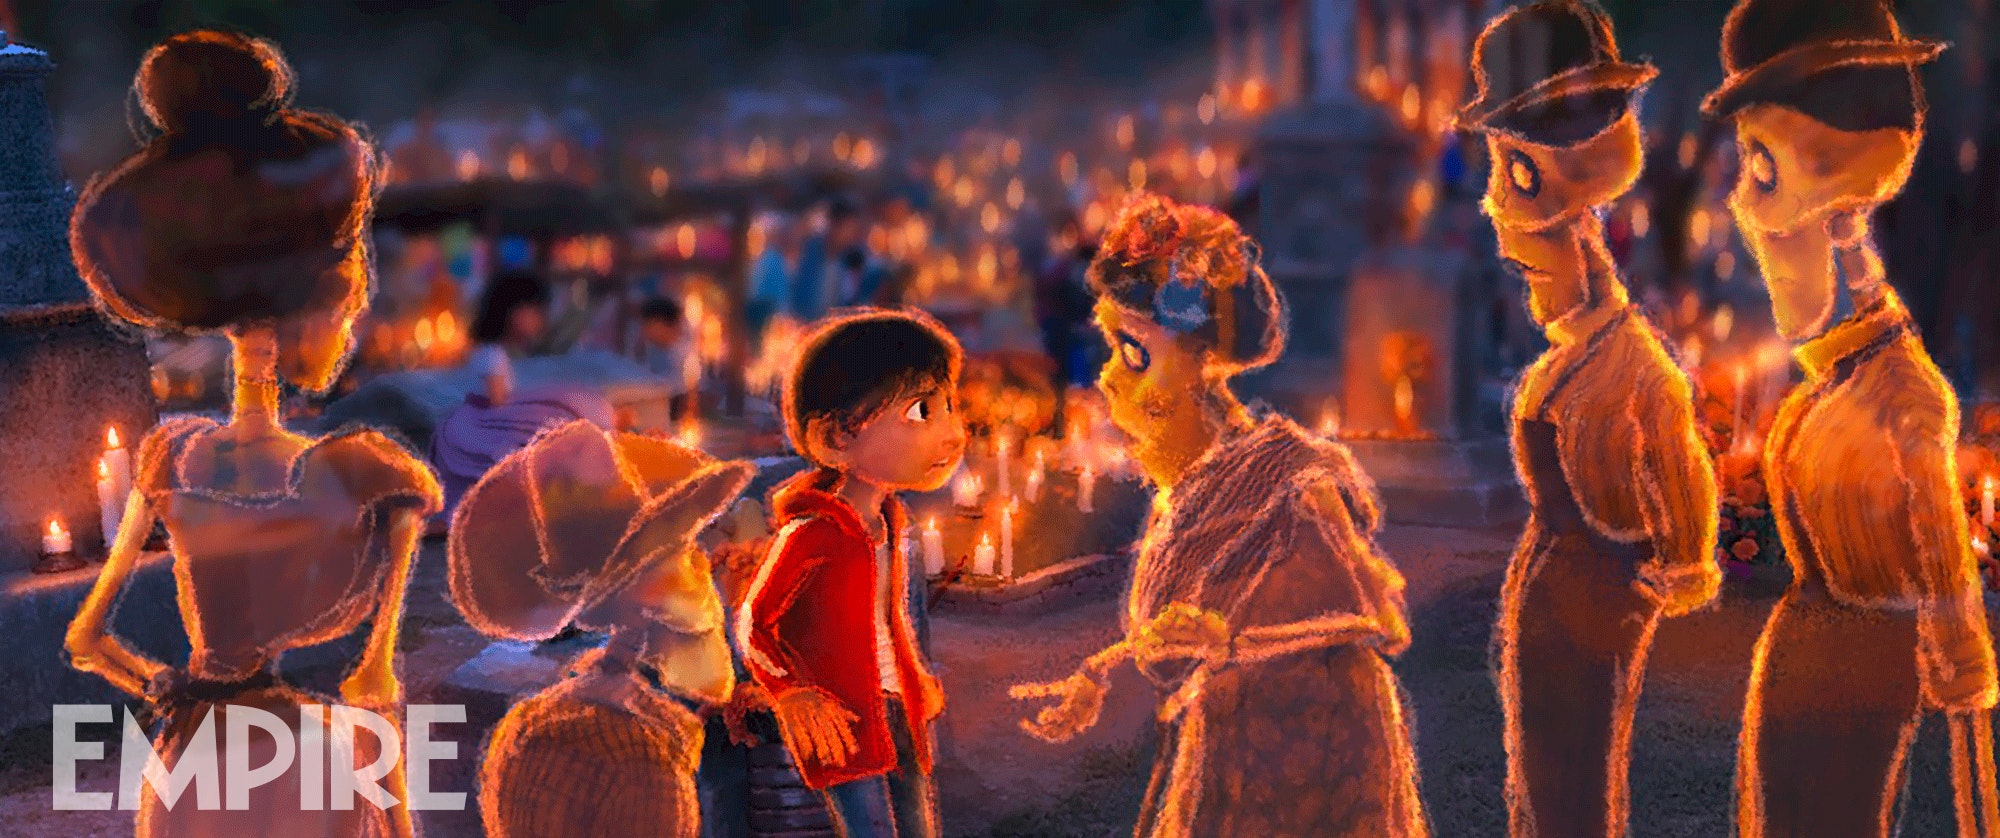 Coco Trailer Introduces Miguel's Family from the Land of the Dead